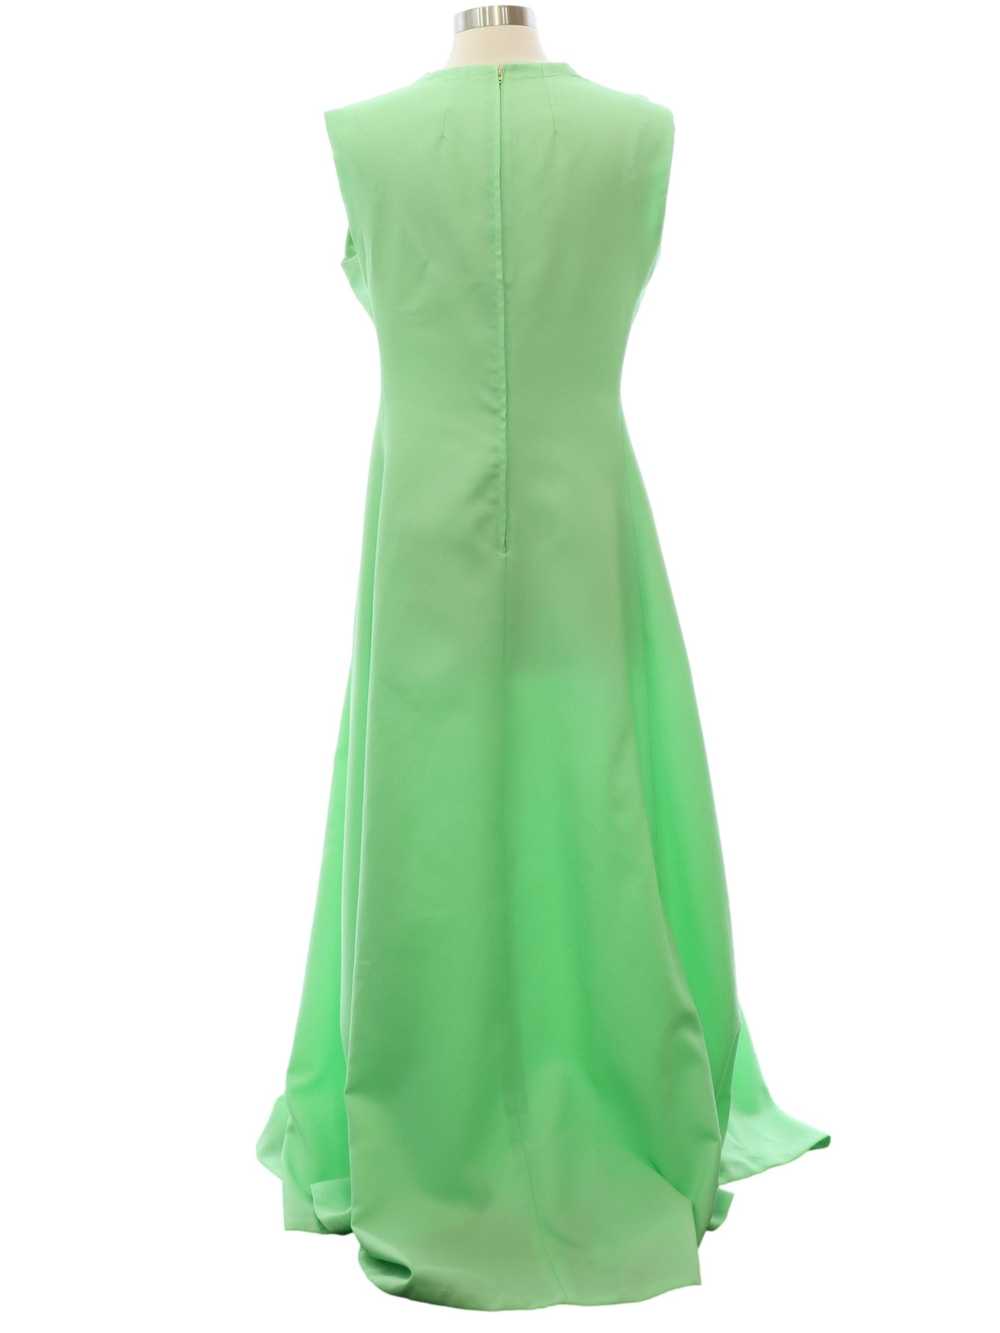 1970's Prom Or Cocktail Maxi Dress - image 3